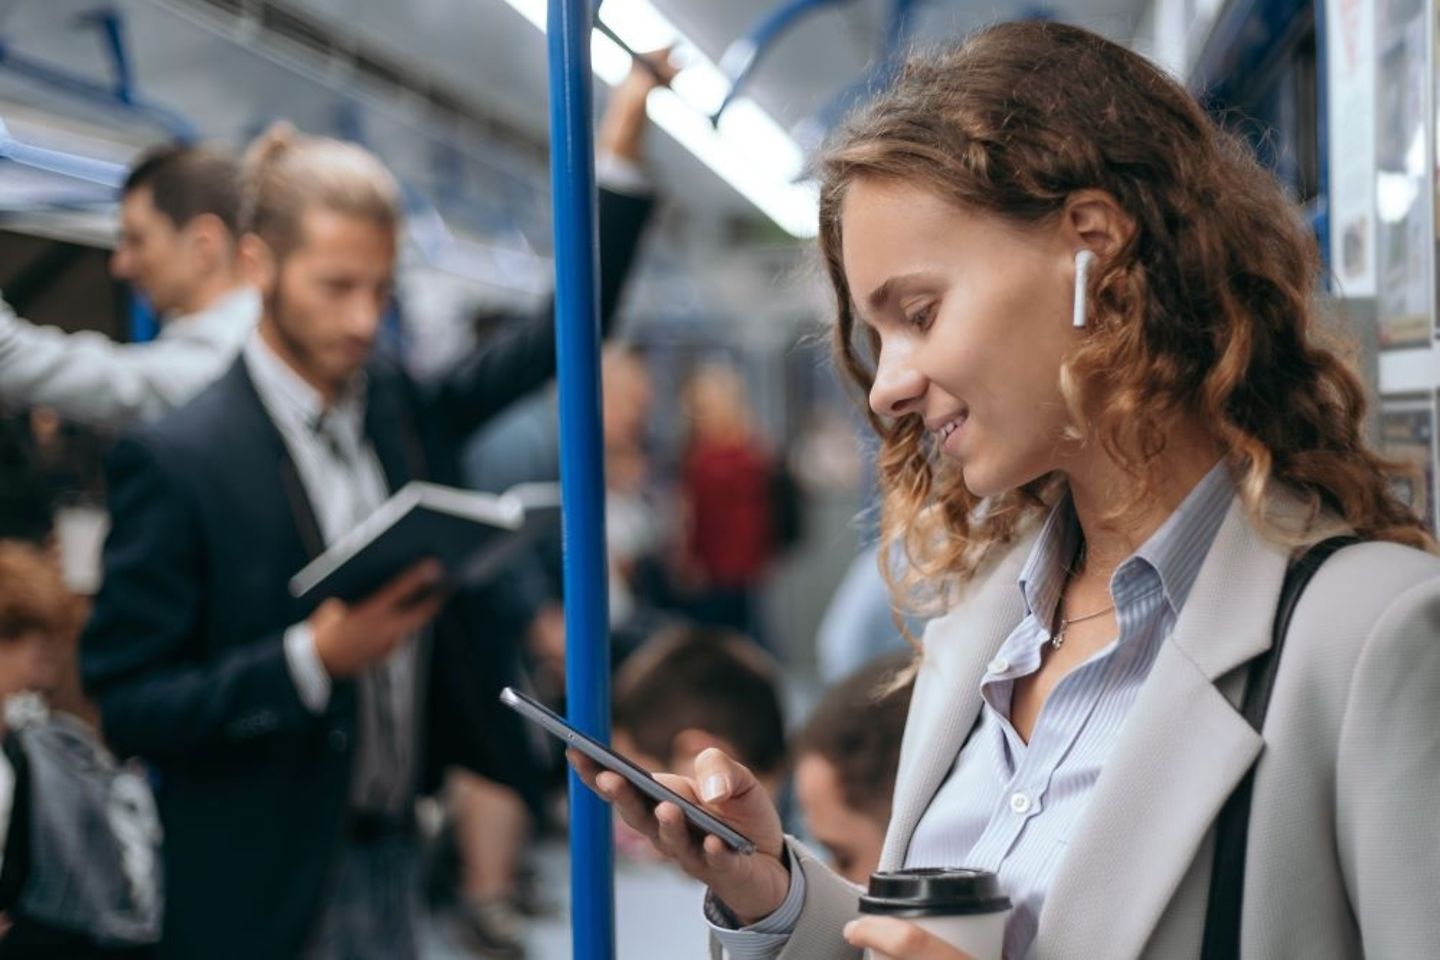 Businesswoman taking the subway to her office reads smartphone